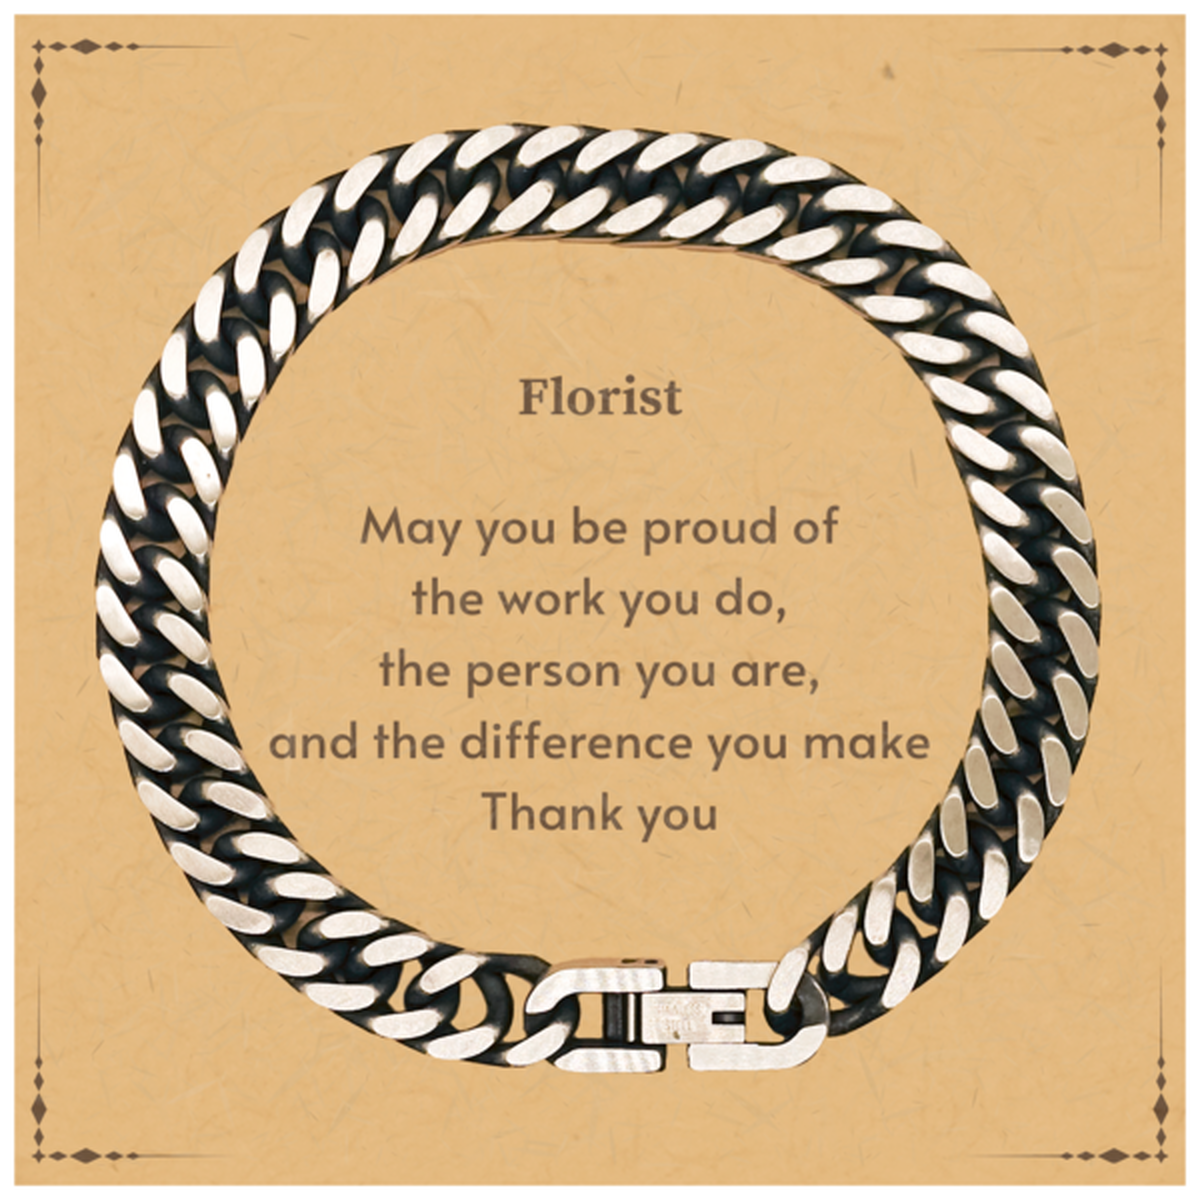 Heartwarming Cuban Link Chain Bracelet Retirement Coworkers Gifts for Florist, Florist May You be proud of the work you do, the person you are Gifts for Boss Men Women Friends